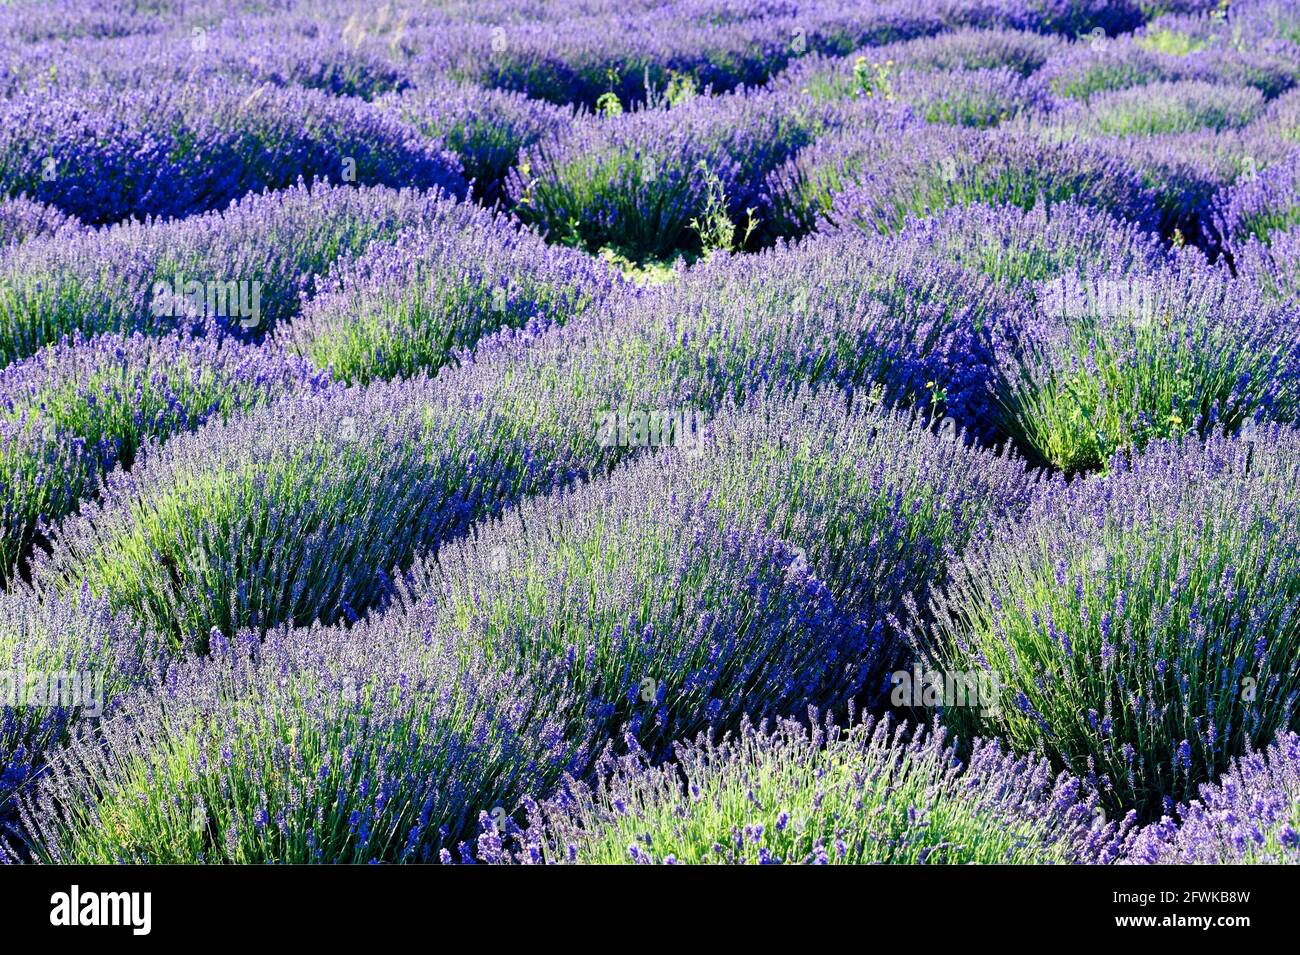 Field of lavendar in summer UK & IRISH RIGHTS ONLY, OTHER RIGHTS CONTACT EWASTOCK@GMAIL.COM *** Local Caption *** 01684082 Stock Photo